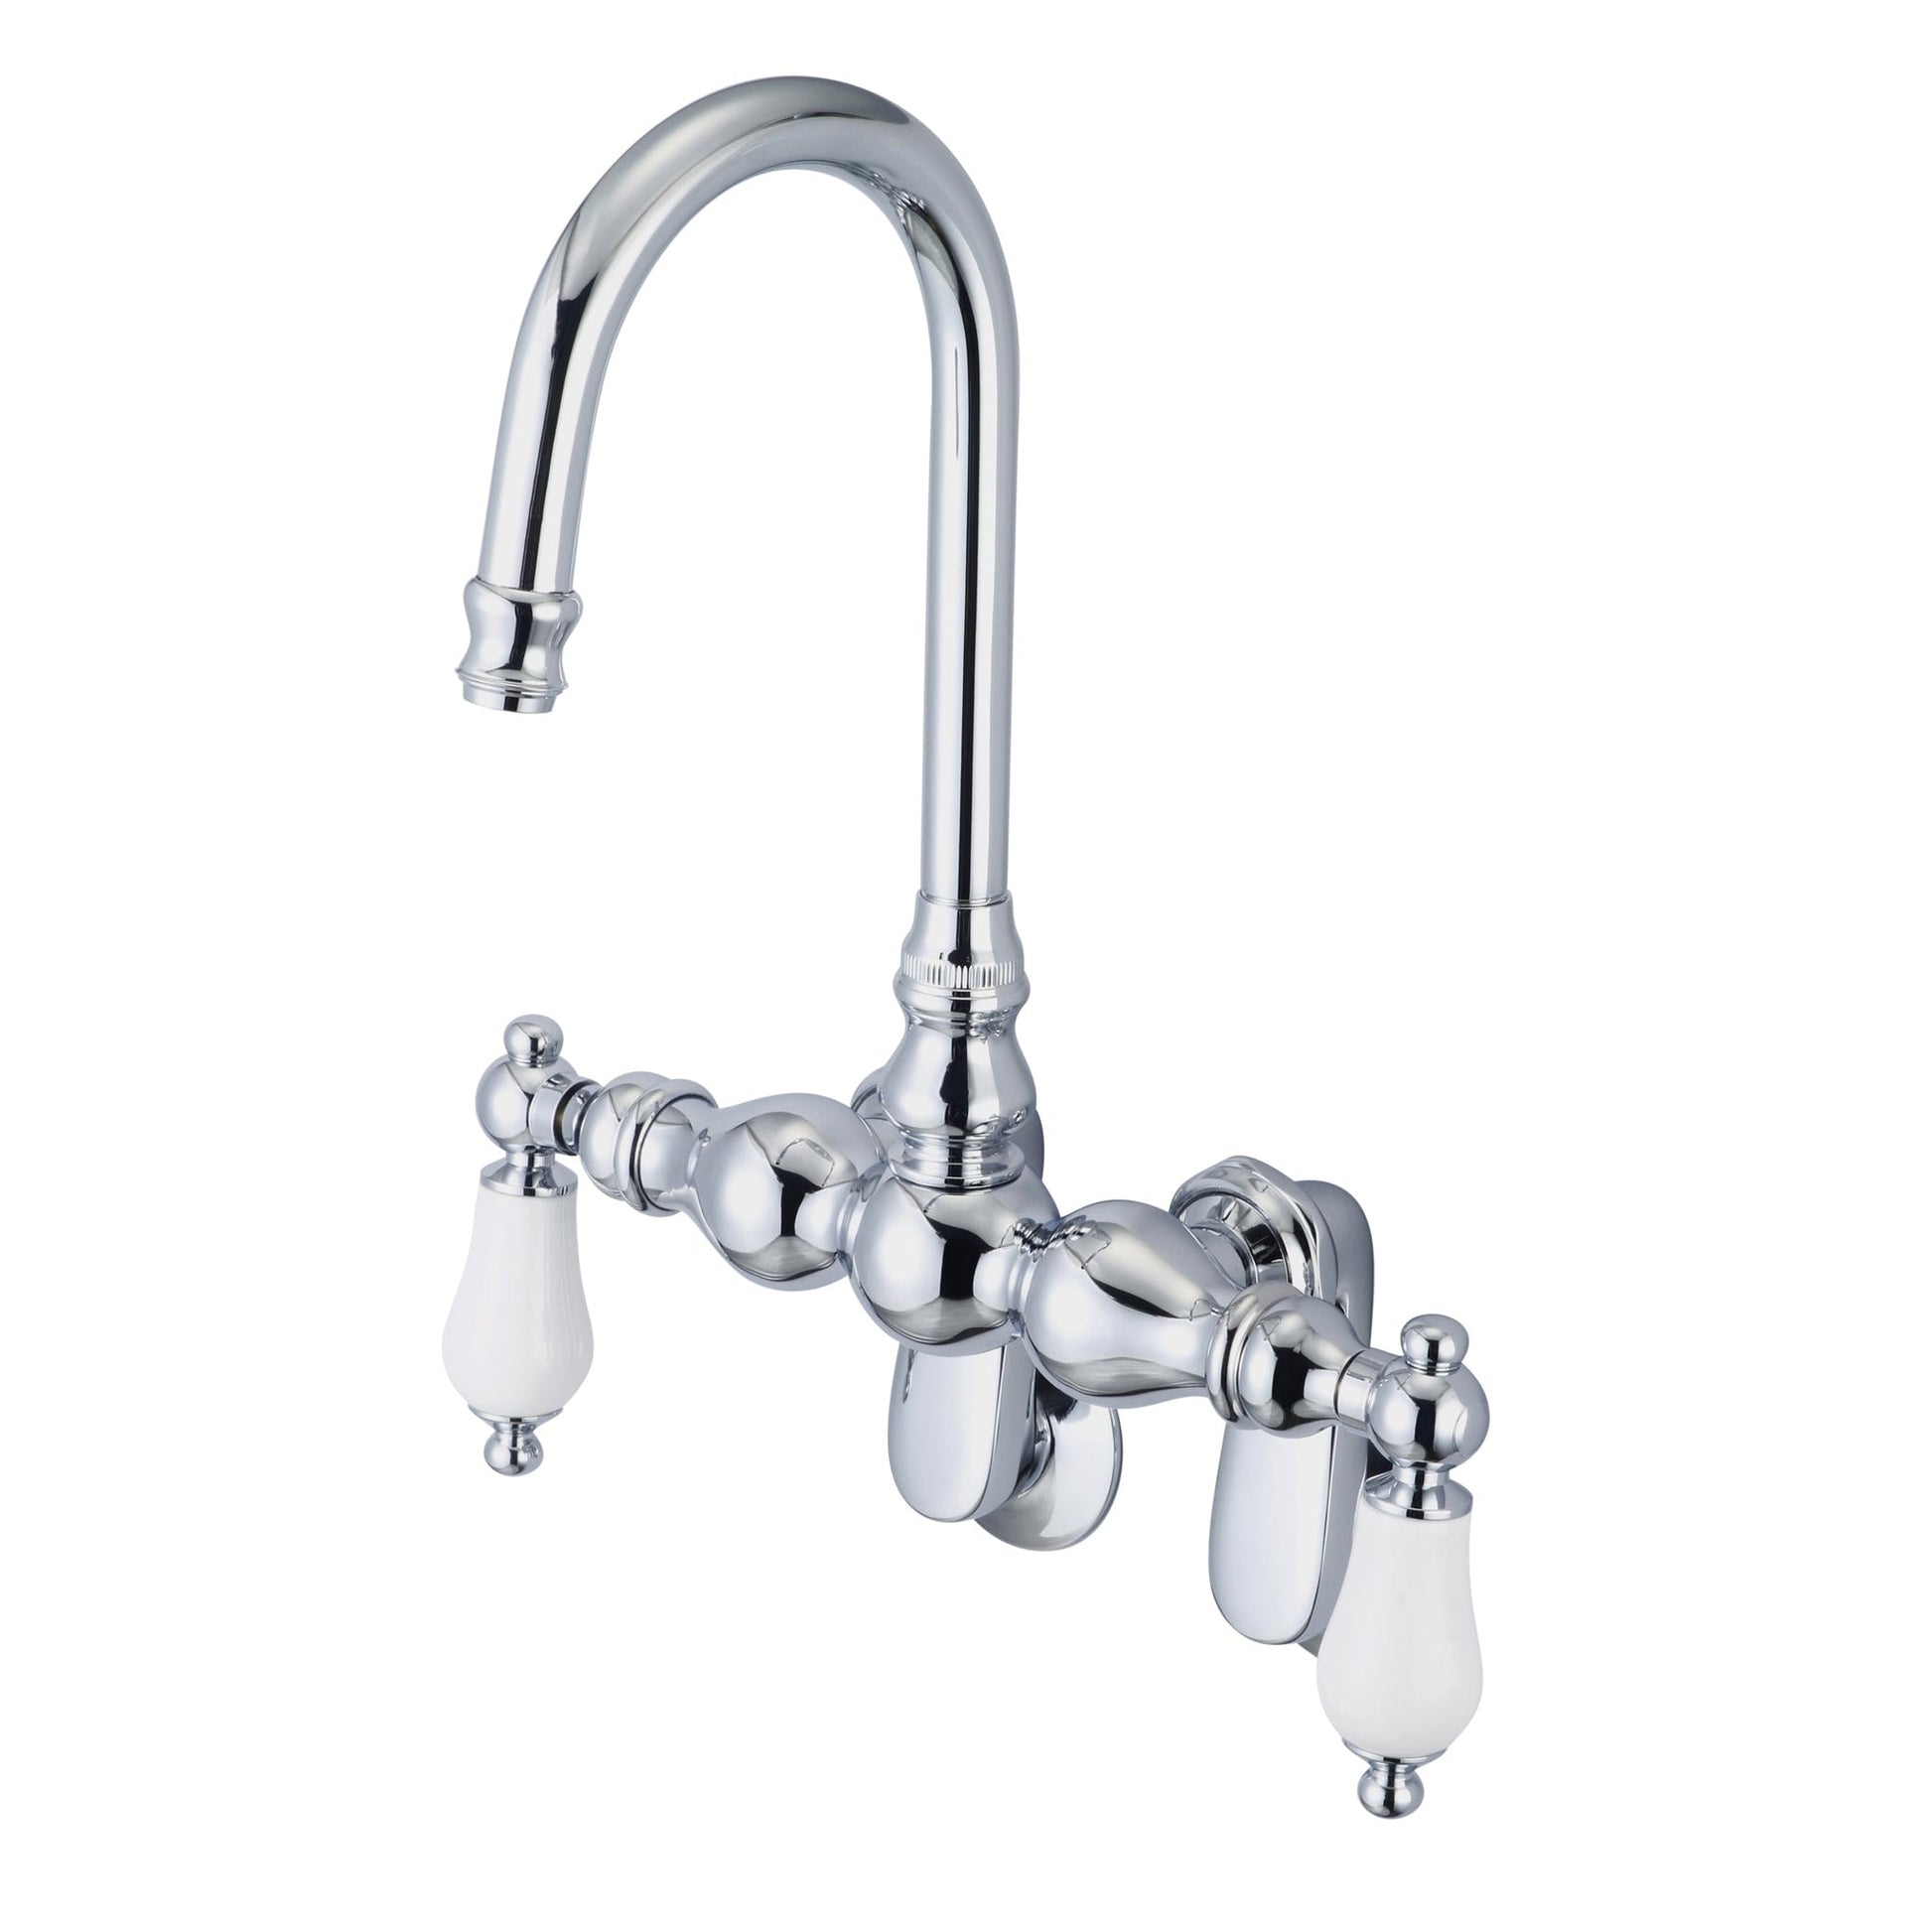 Water Creation Vintage Classic Adjustable Spread Wall Mount Tub F6-0015 9.25" Silver Solid Brass Faucet With Gooseneck Spout And Swivel Wall Connector And Porcelain Lever Handles Without Labels